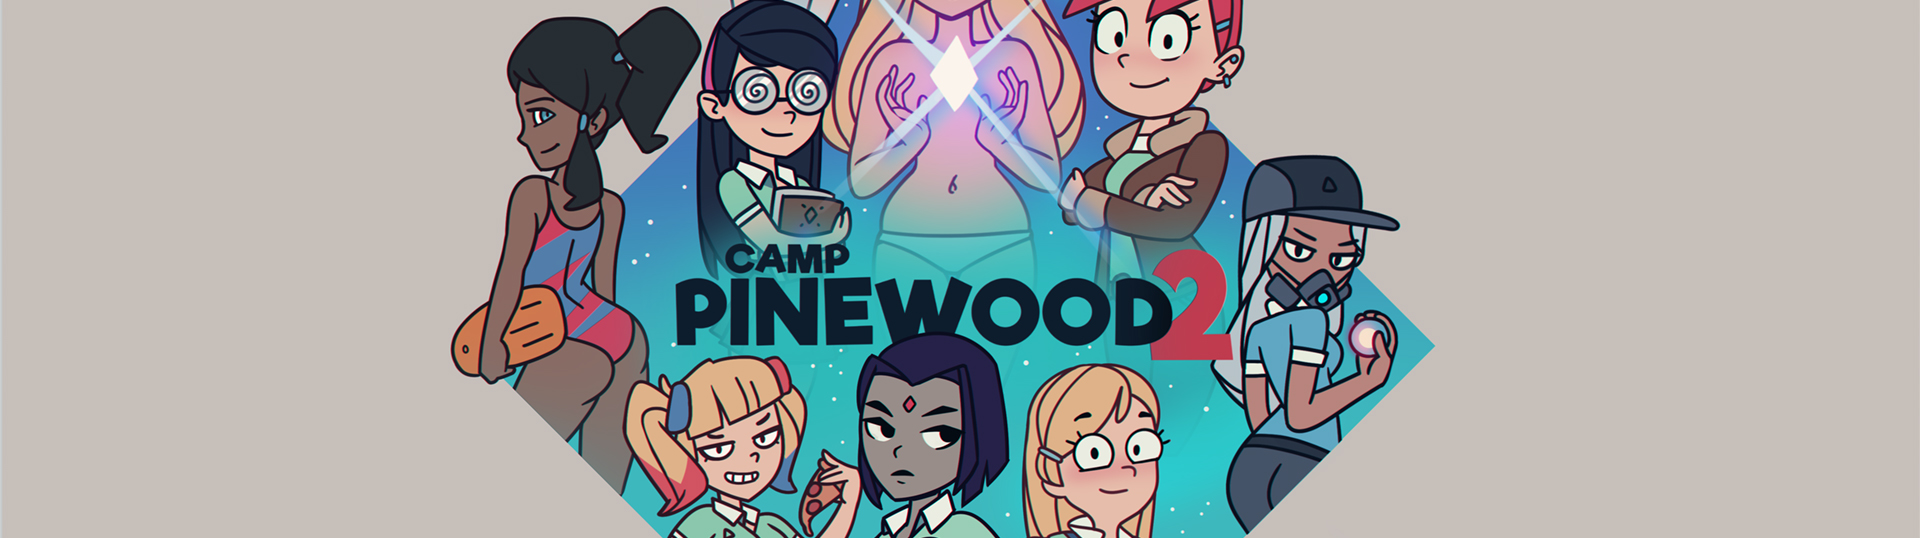 camp pinewood 2 apk android